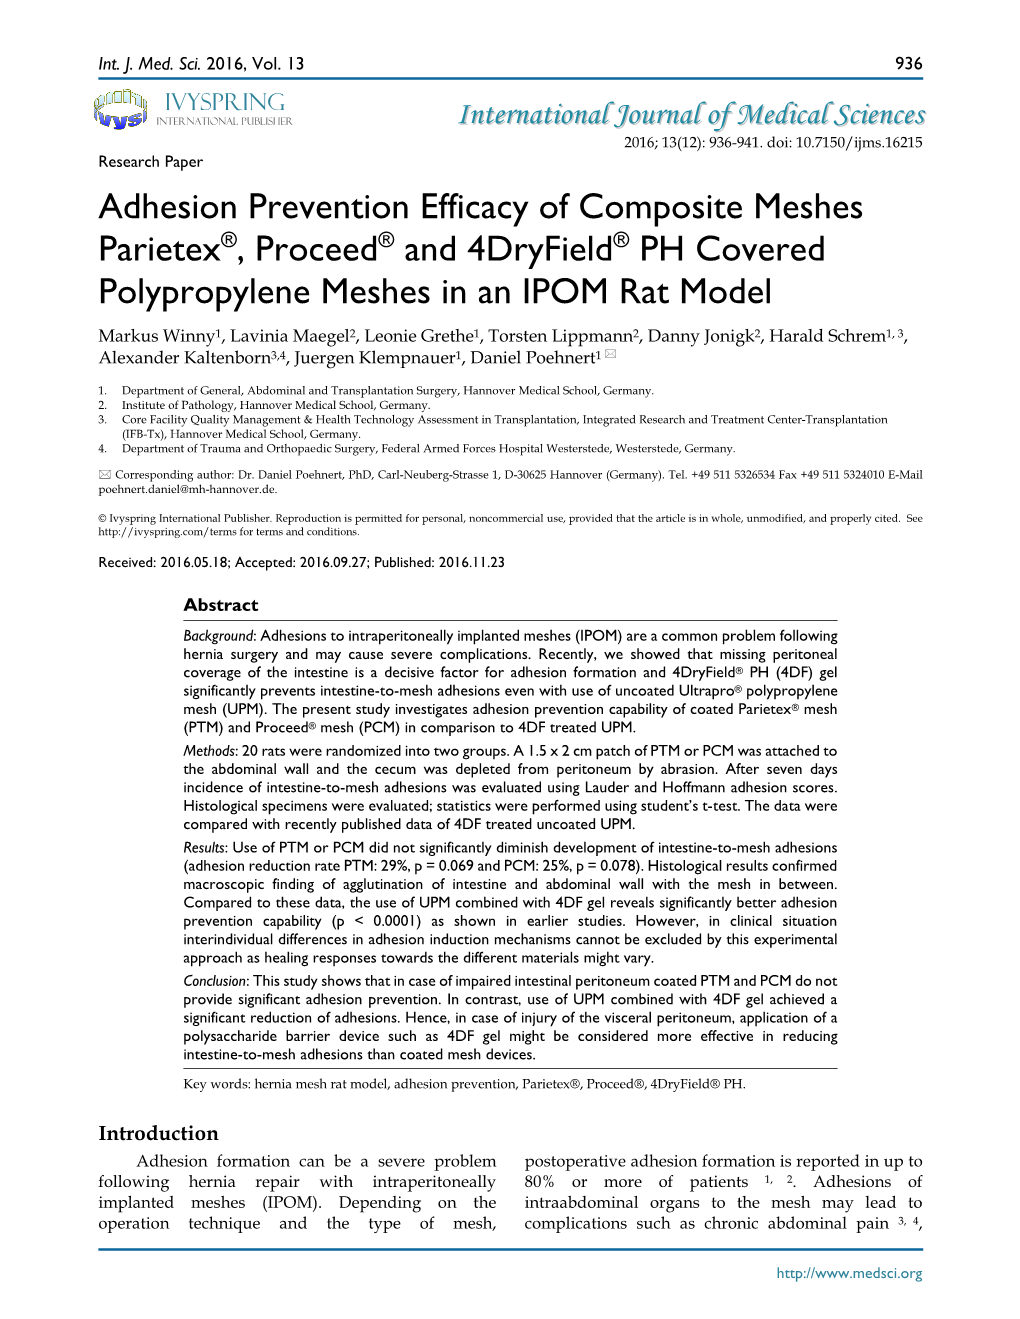 Adhesion Prevention Efficacy of Composite Meshes Parietex